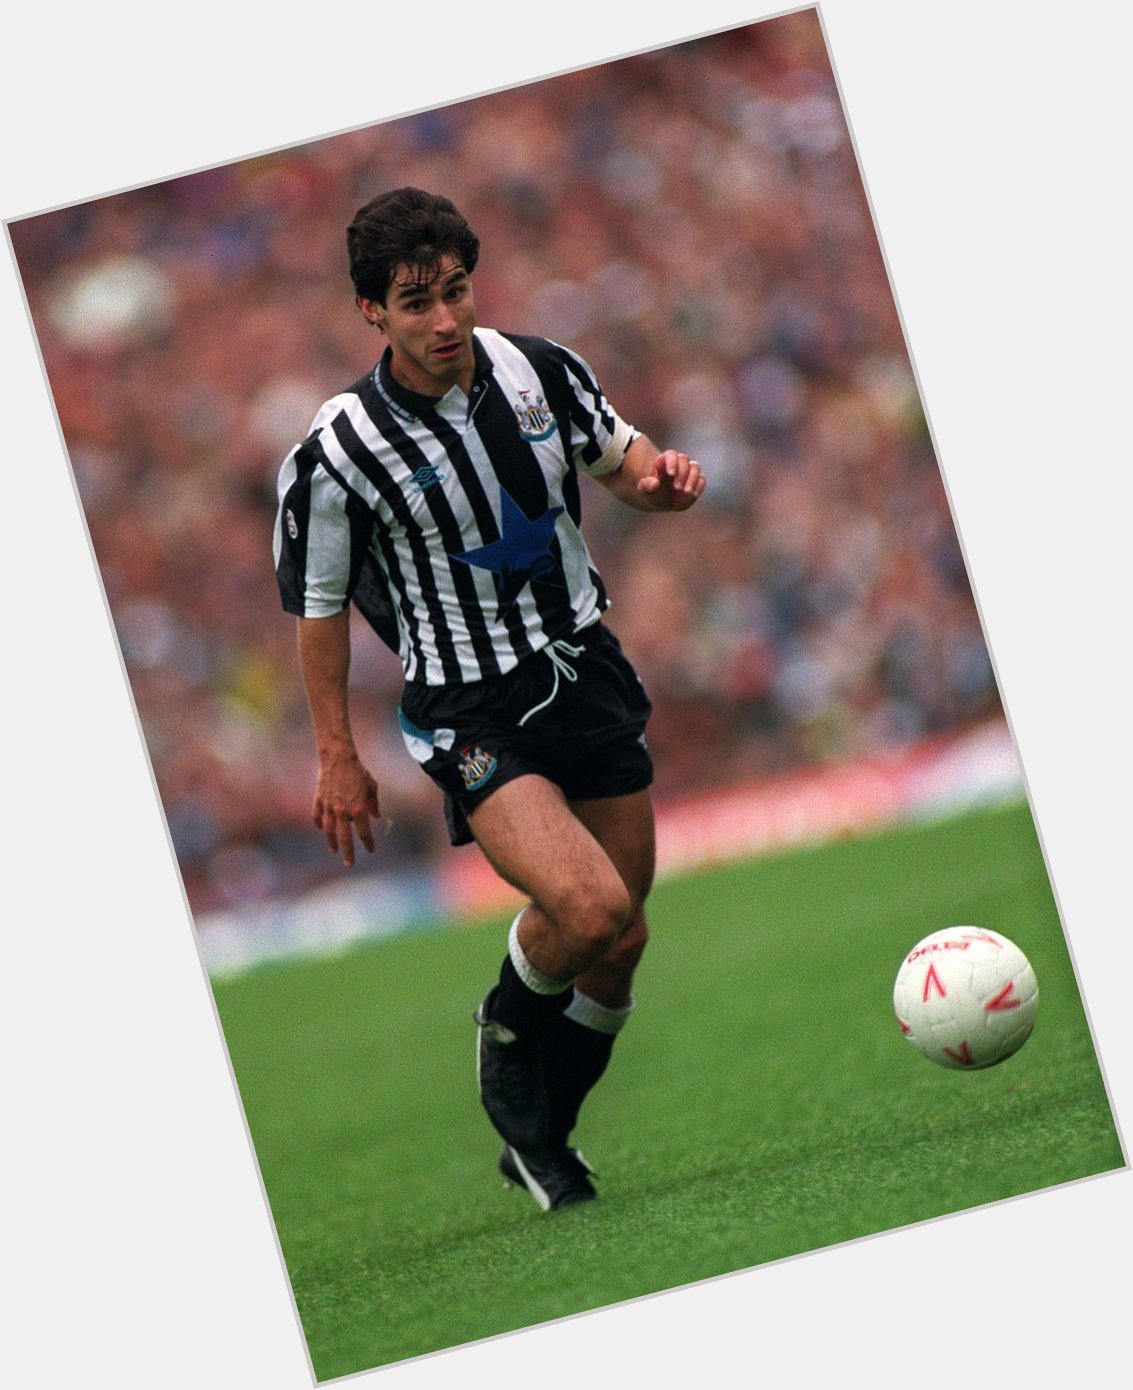  Happy birthday to former star Gavin Peacock.

Give us your best memories of his time on Tyneside.  